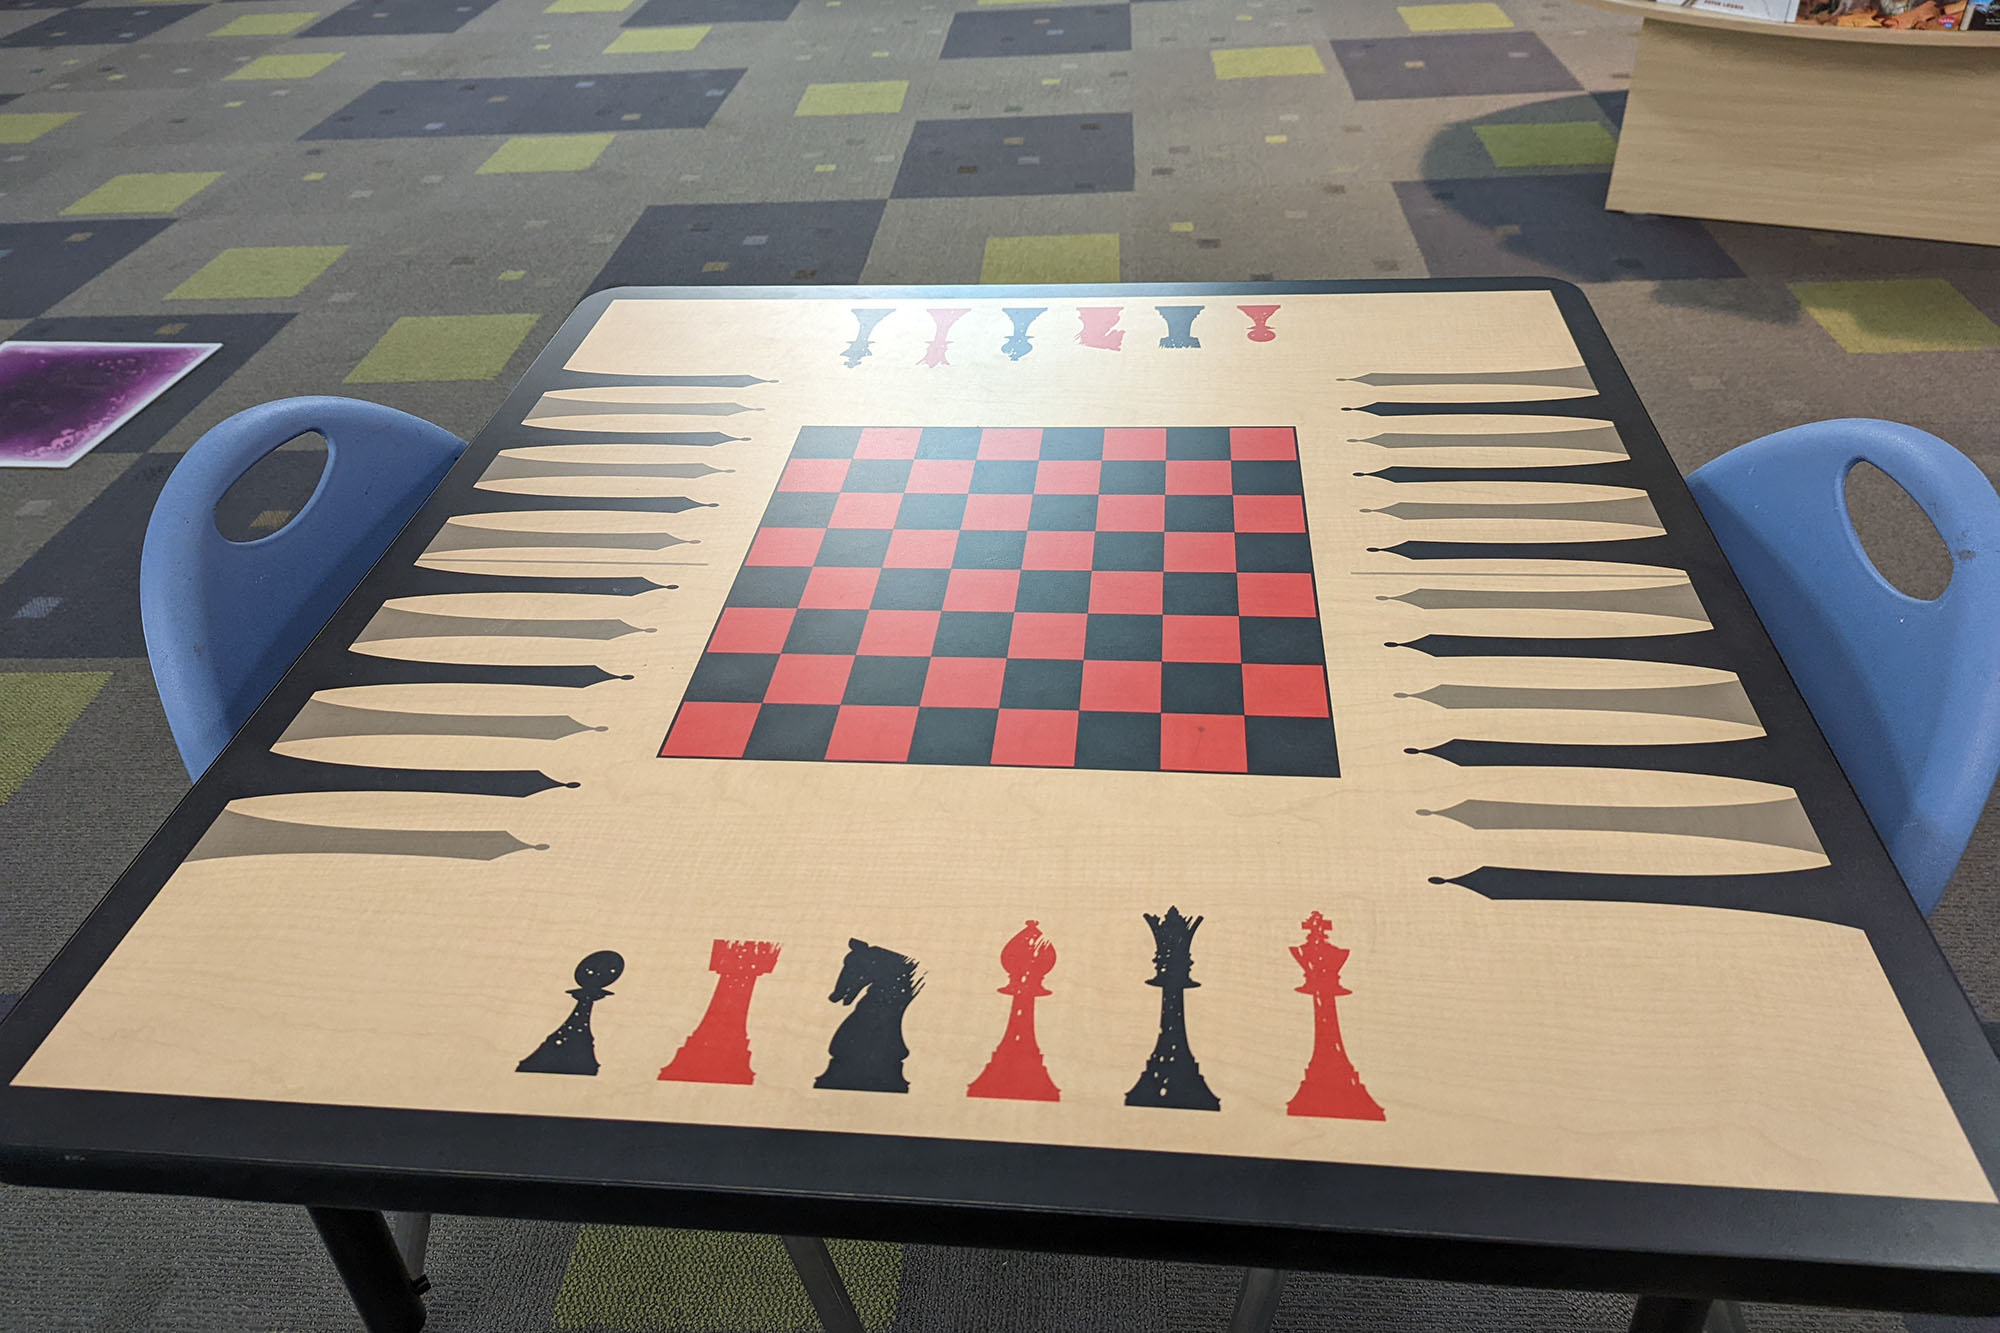 This is a sample photo of a chess board from the main camera of the Pixel 6.